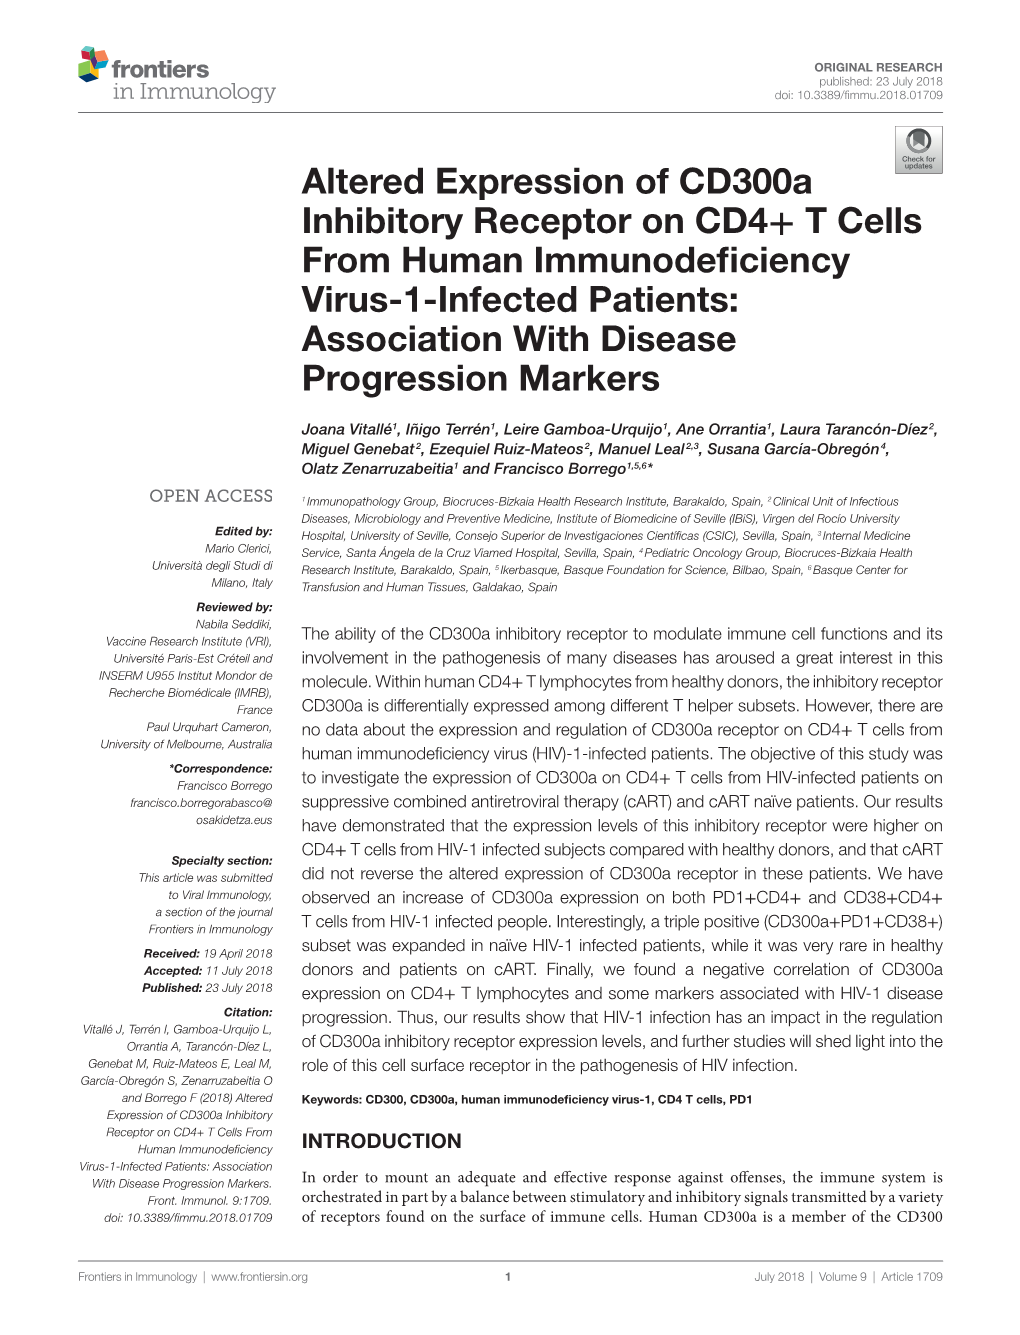 Altered Expression of Cd300a Inhibitory Receptor on Cd4+ T Cells from Human Immunodeficiency Virus-1-Infected Patients: Association with Disease Progression Markers